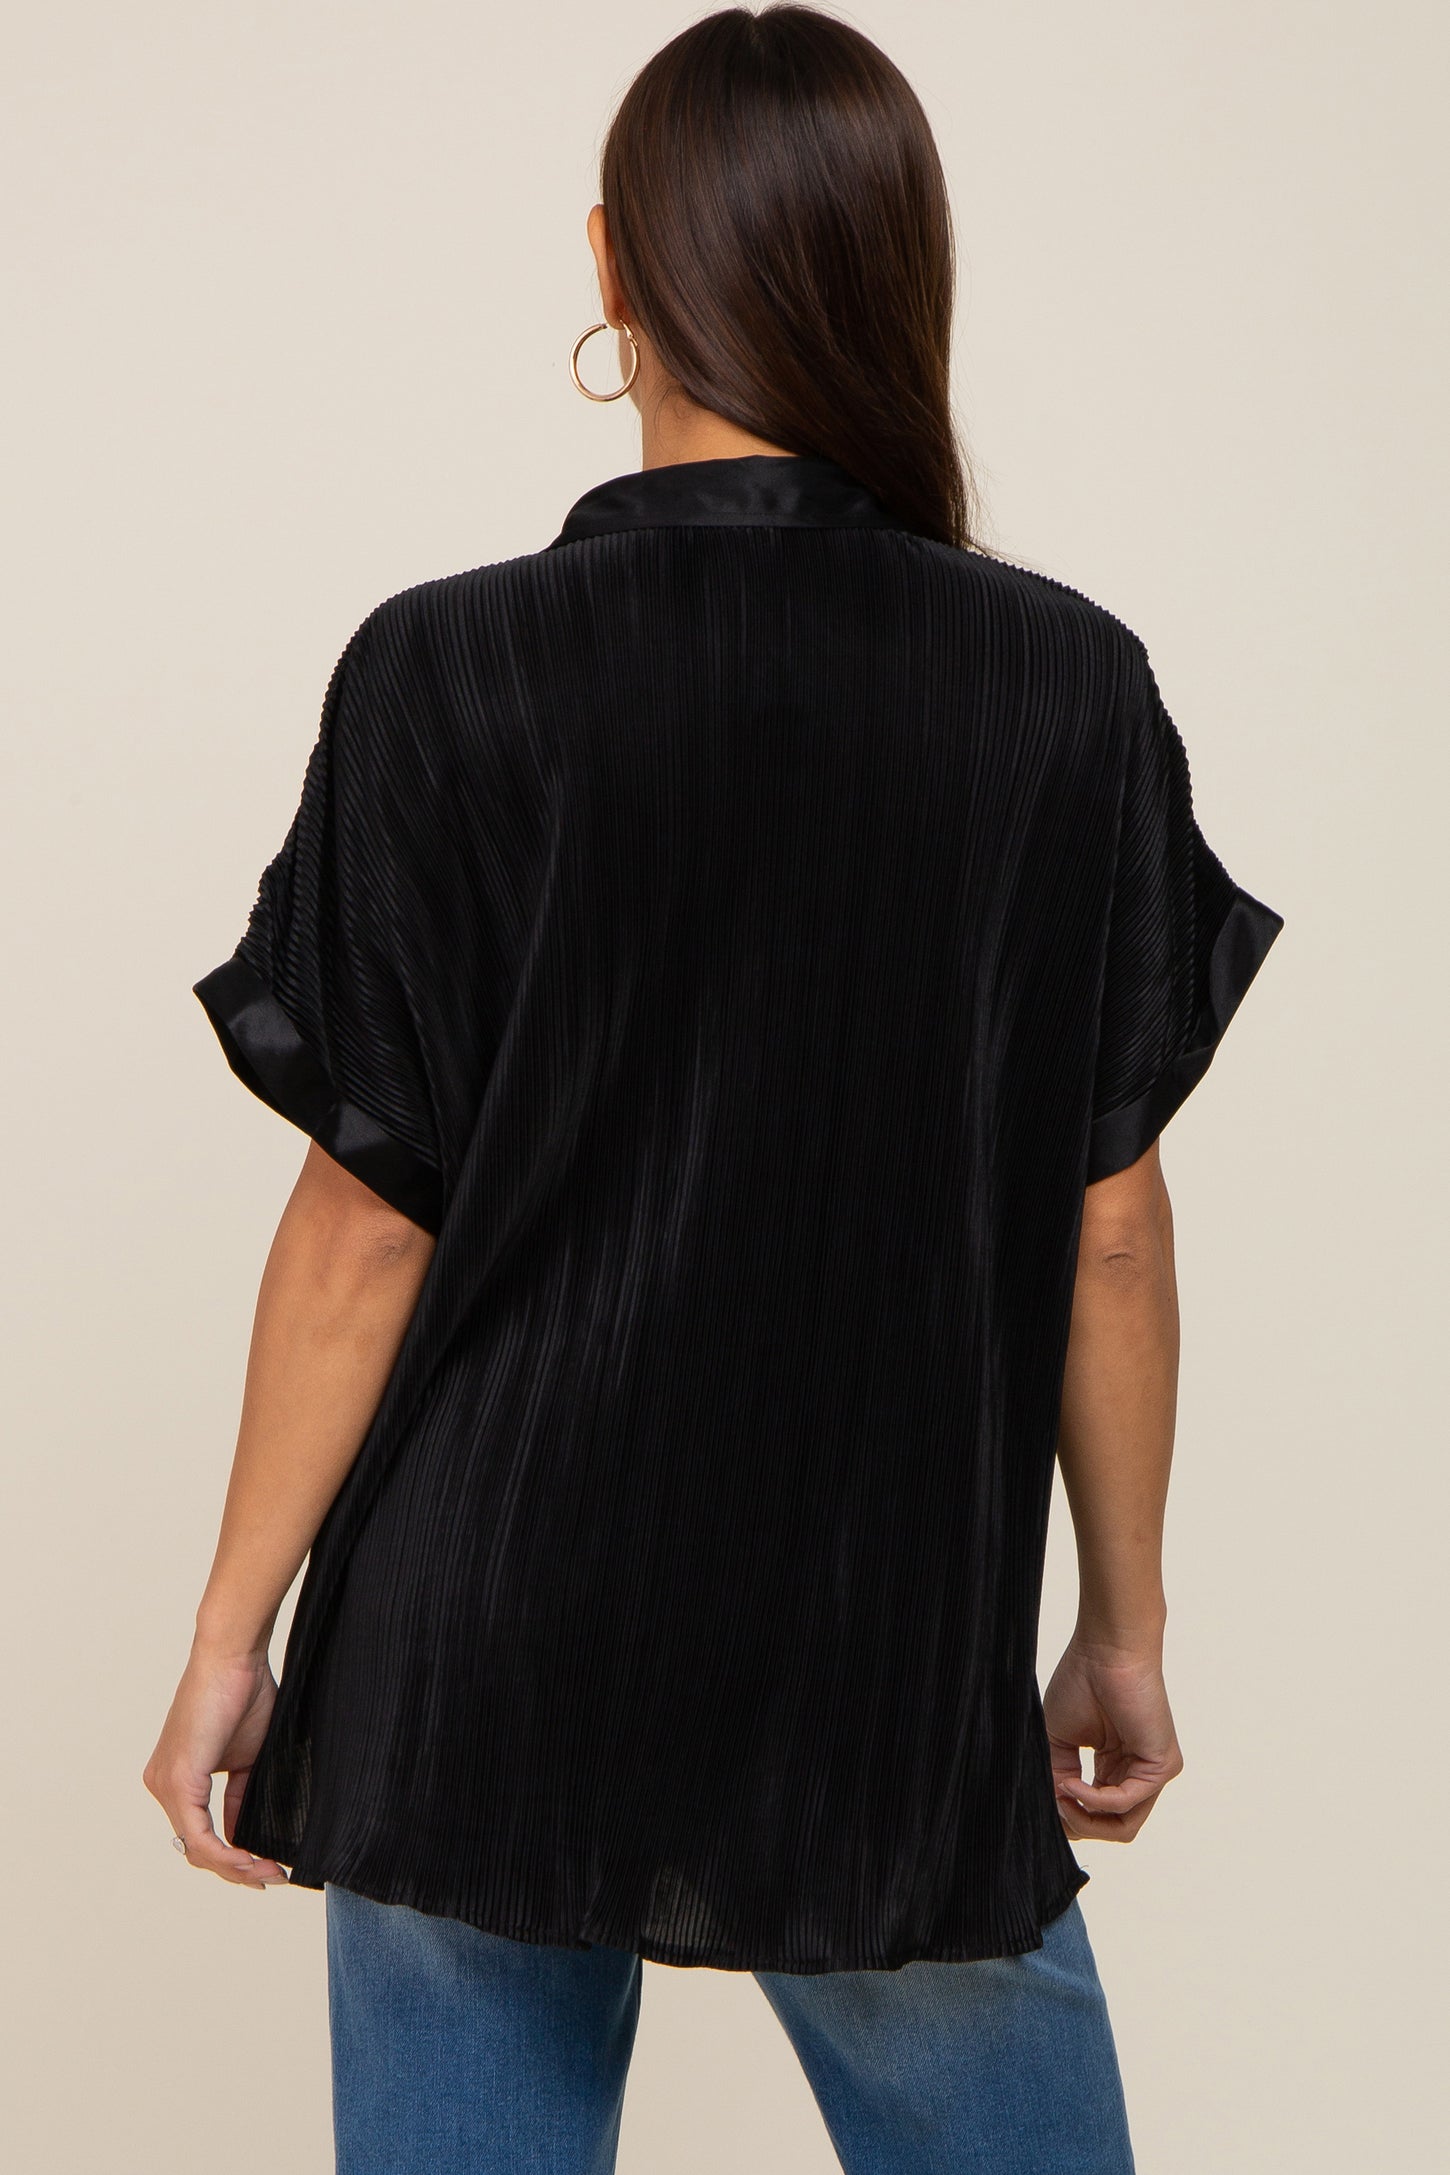 Black Pleated Satin Button Up Maternity Top